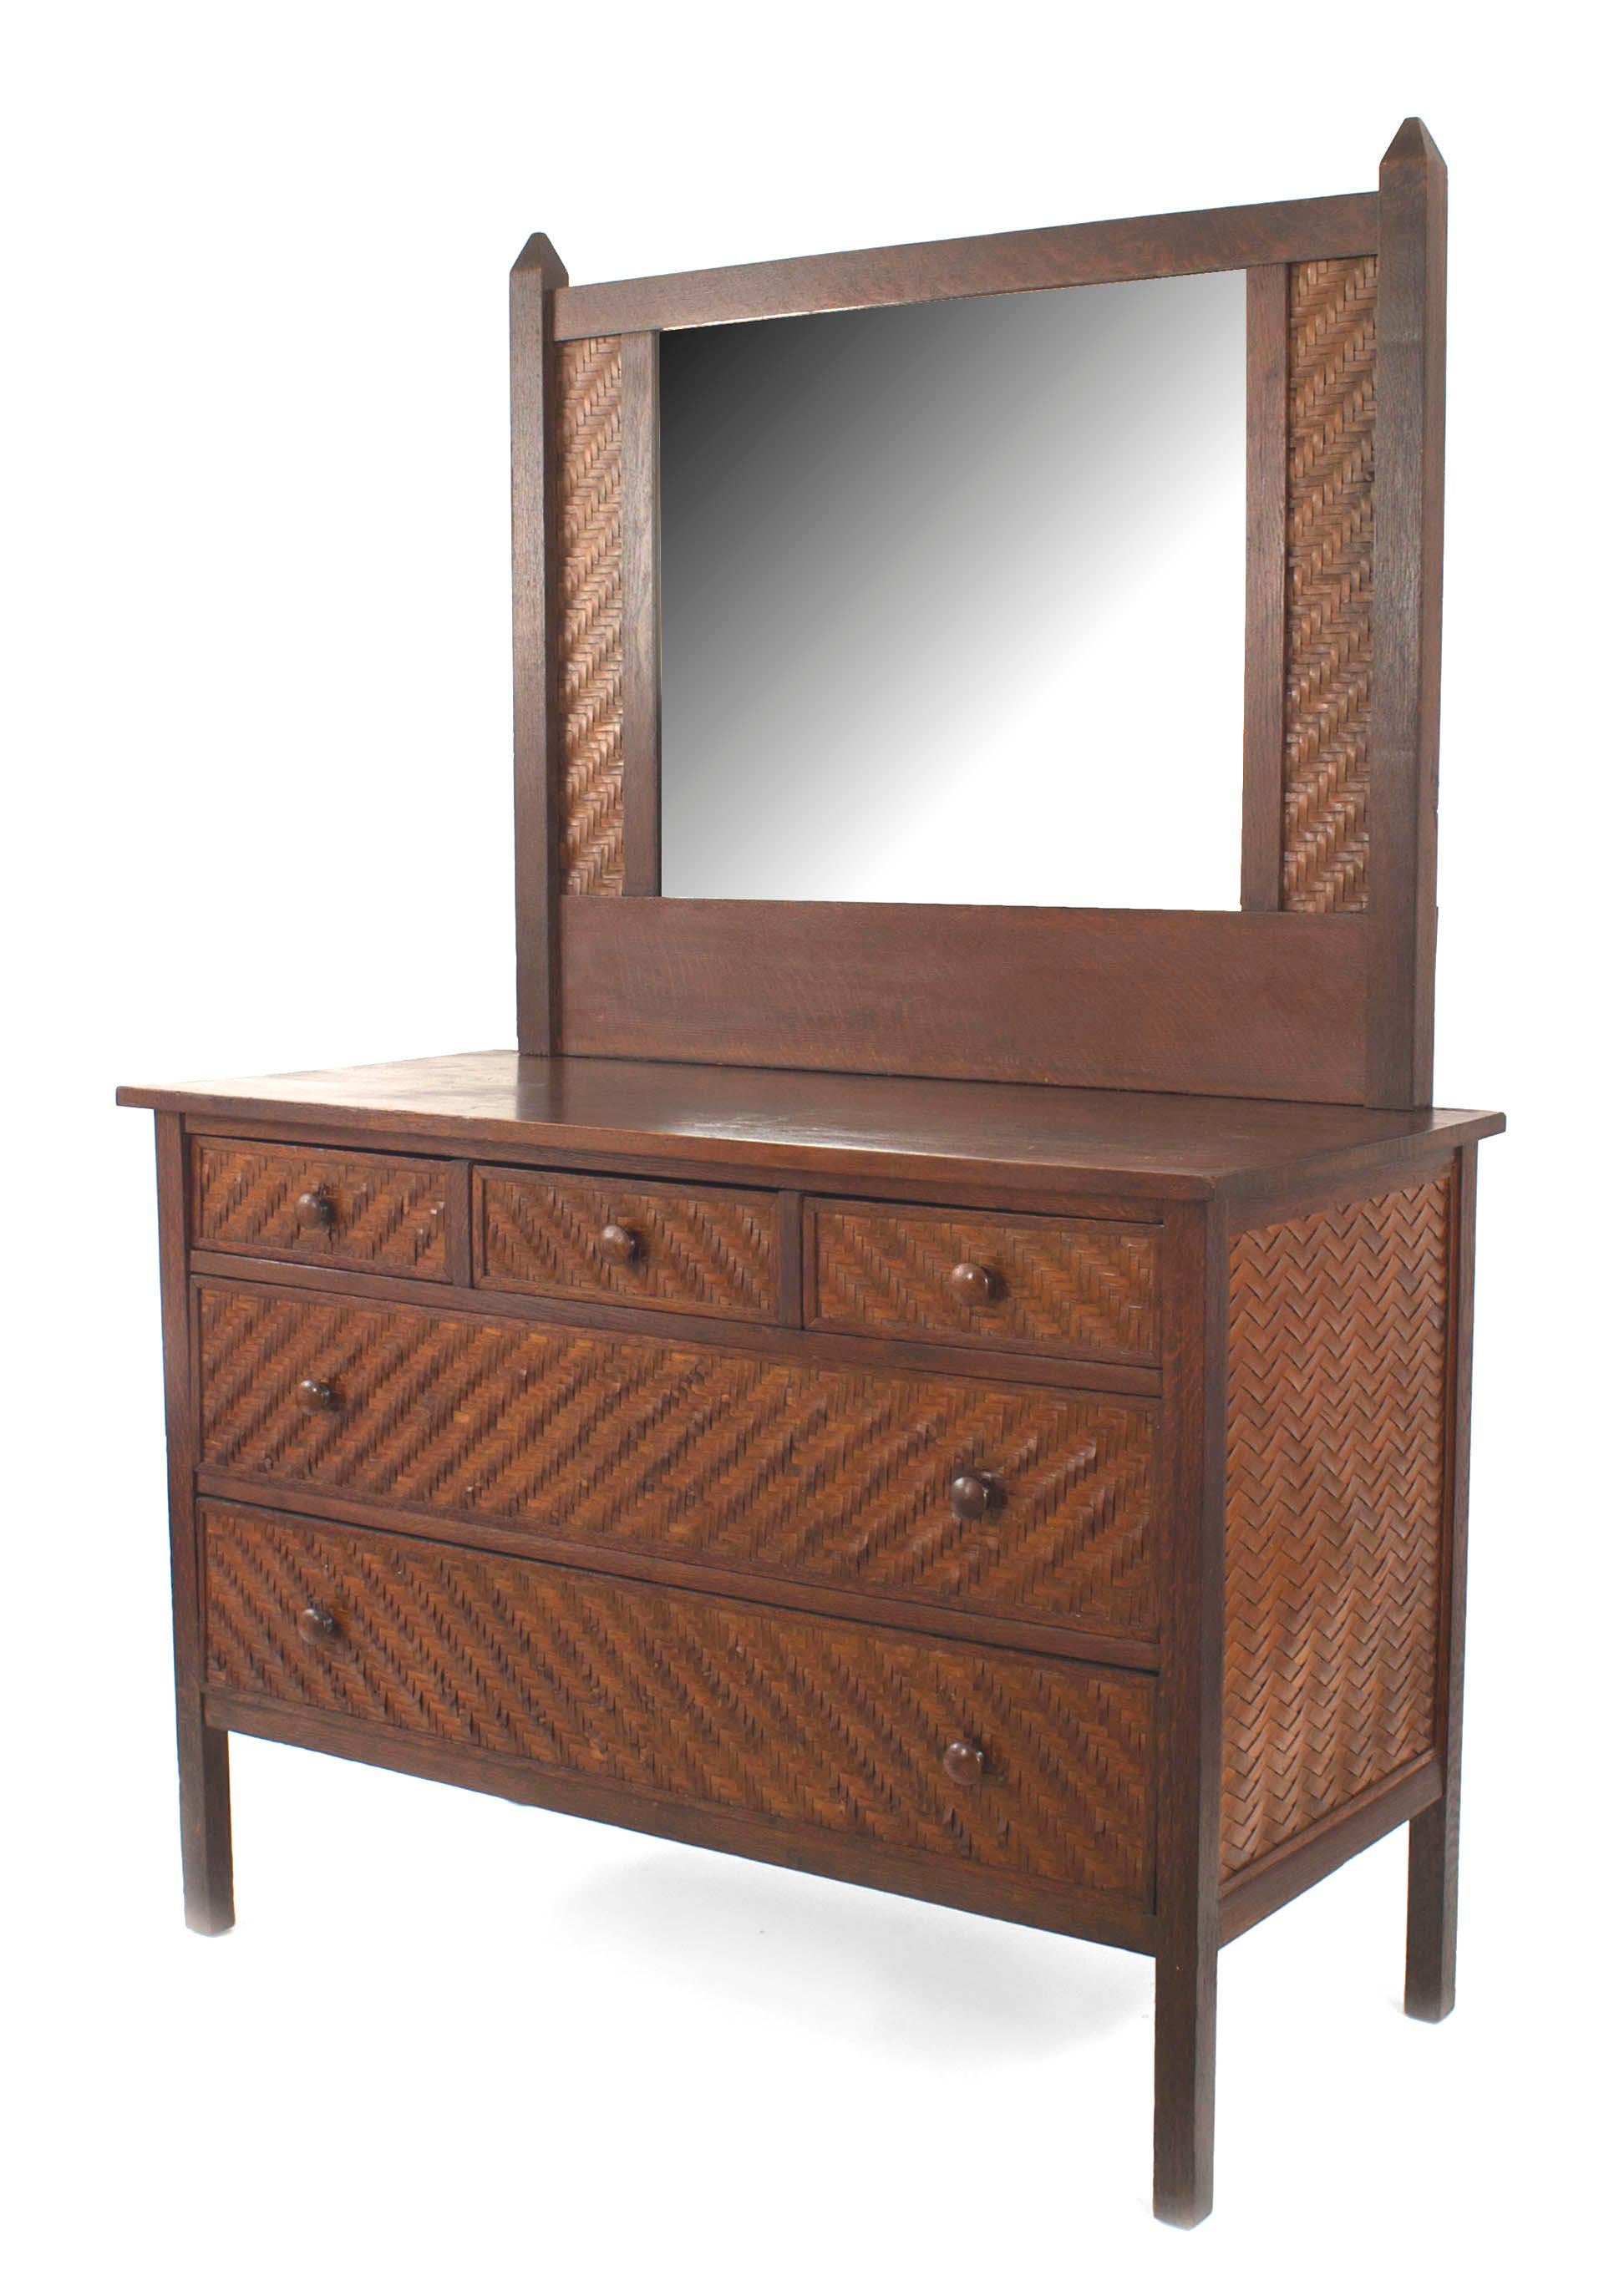 American Rustic Mission dark stained oak dresser with mirror having 3 drawers over 2 large drawers with splint wood woven sides & trim (Indian Splint Manufacturing Co) (Related items: 061006, 061007, 061007A)
